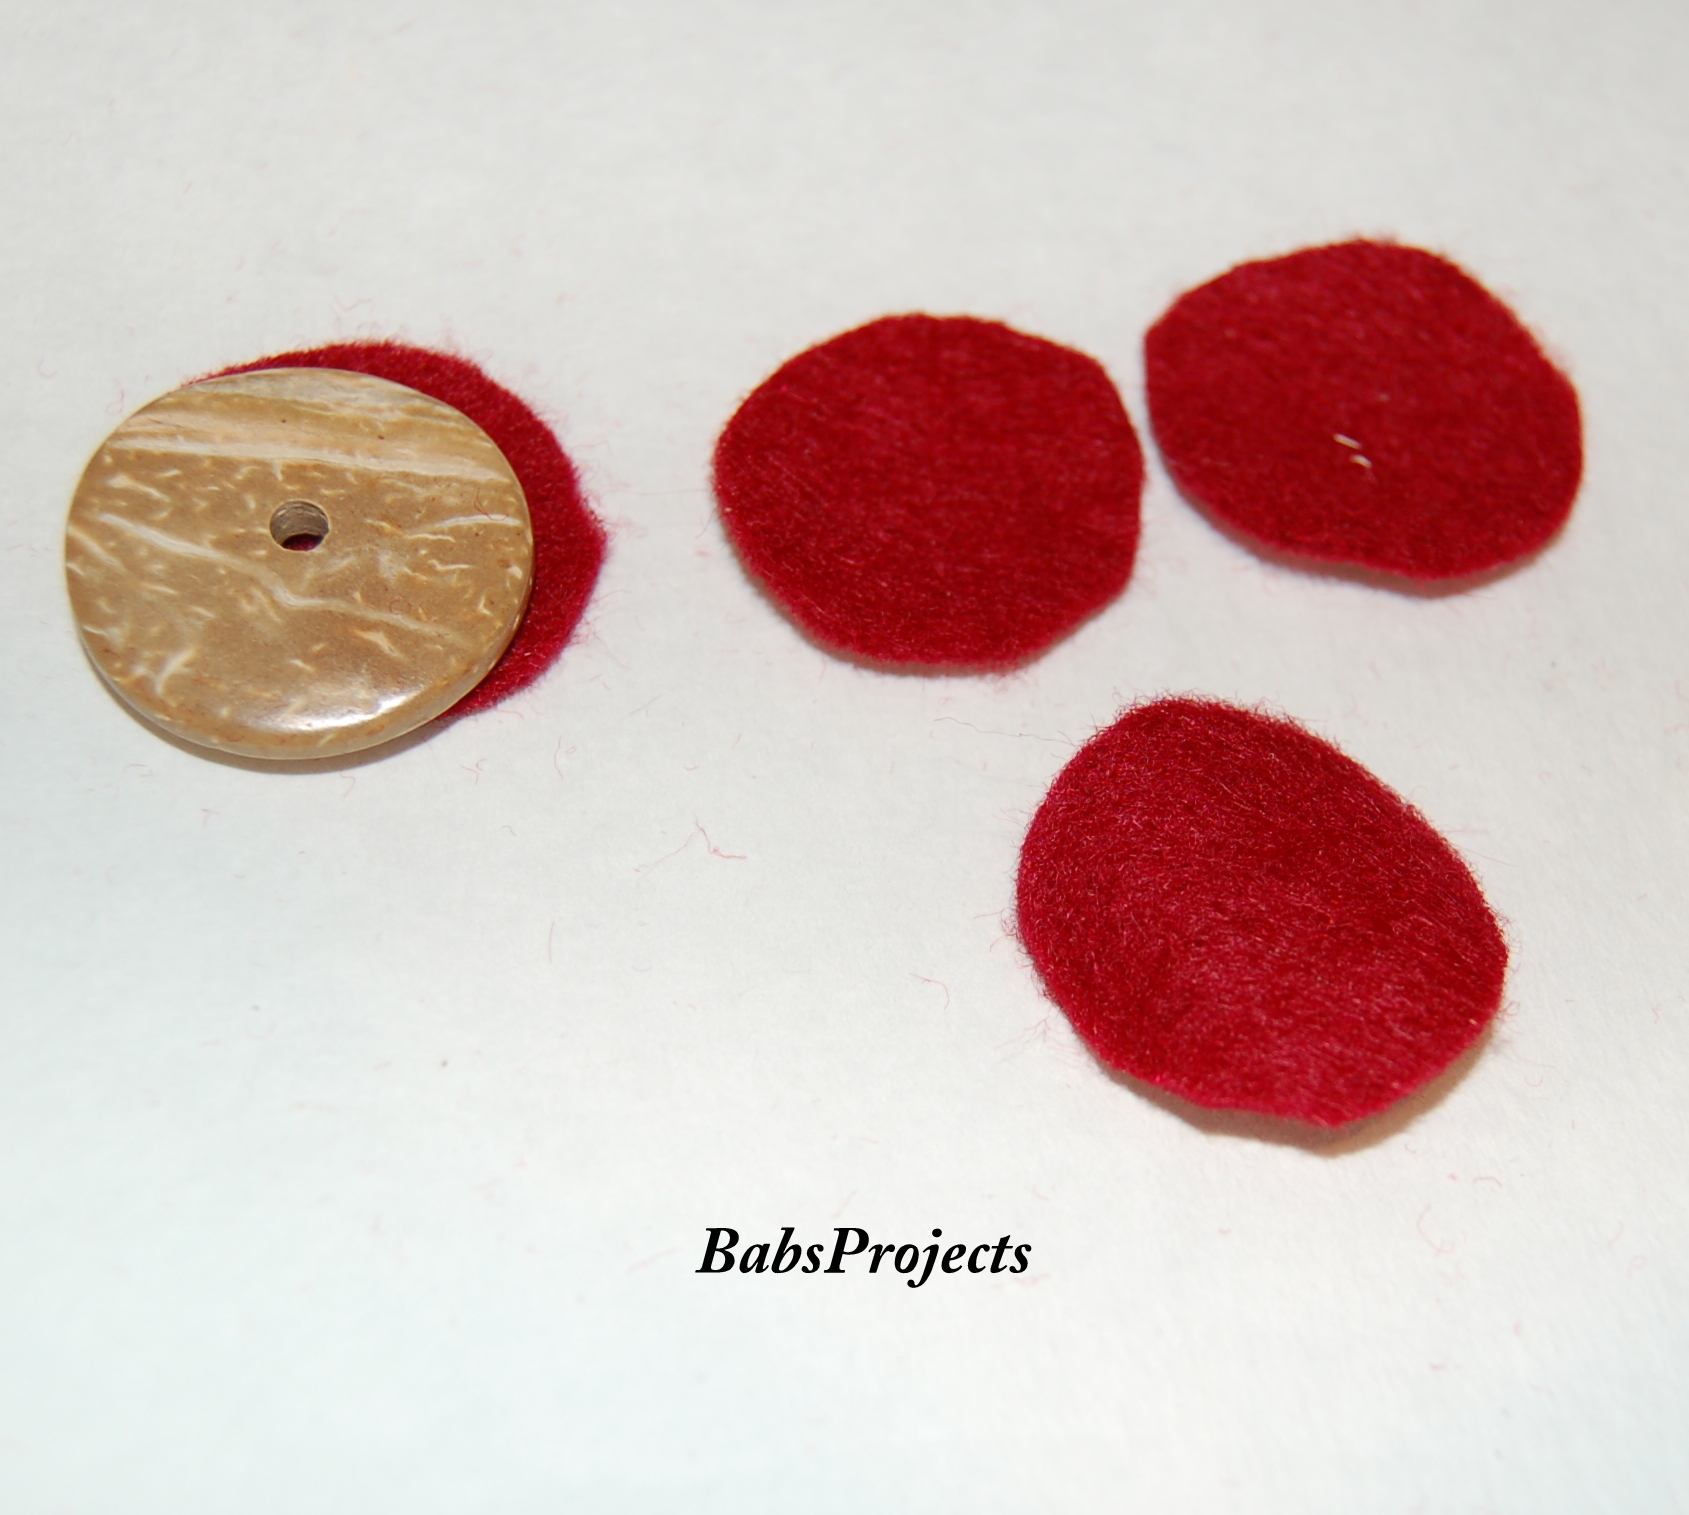 Fabric Covered Wooden Bead Refrigerator Magnets – Babs Projects